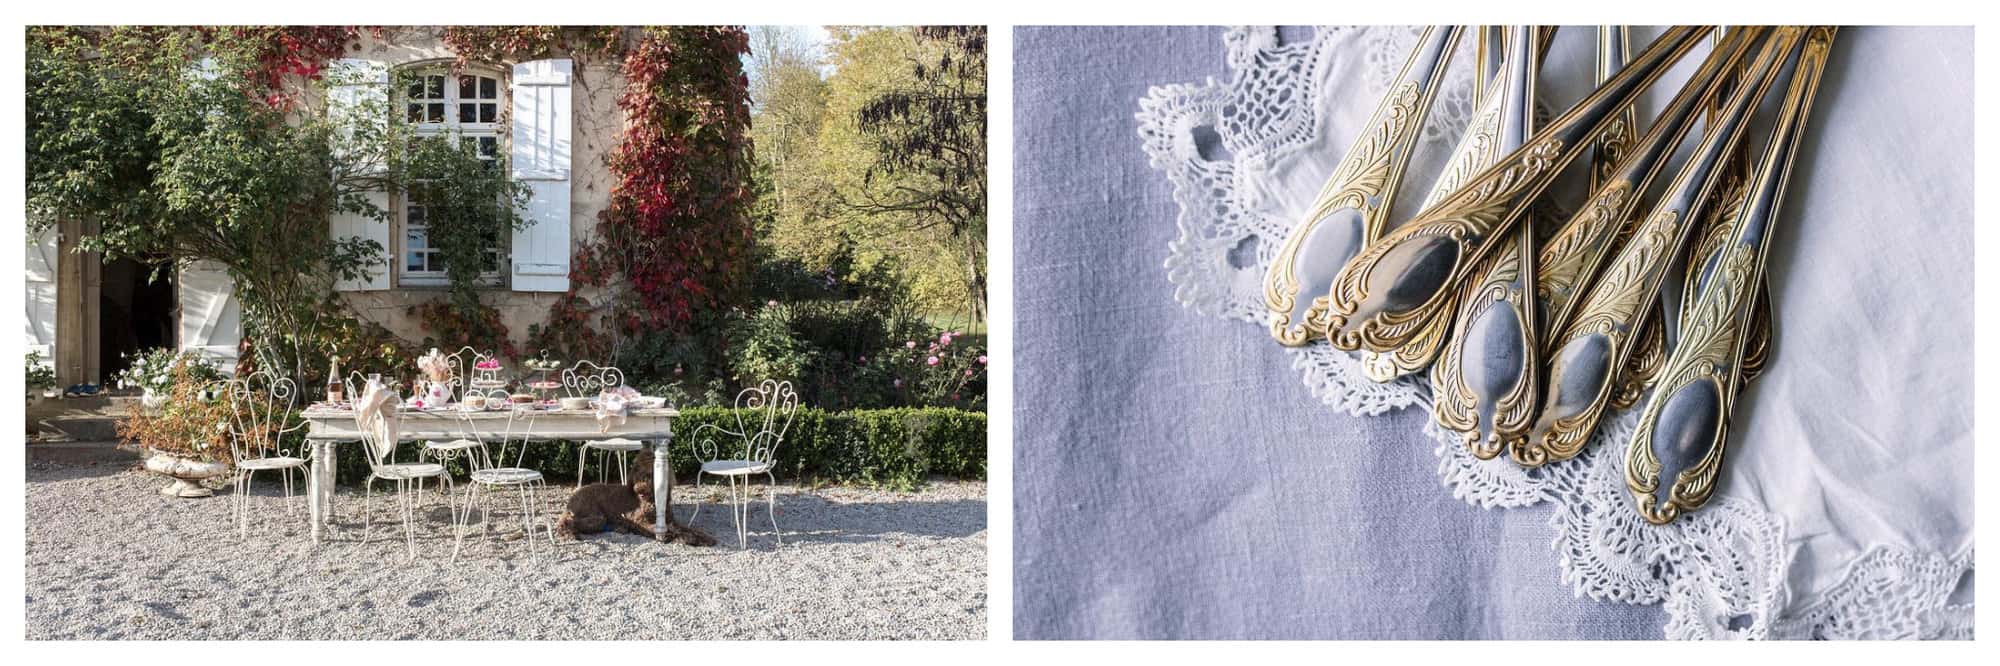 Left: An outdoor dining table in the French countryside, adorned with flowers. Right: A set of vintage silver and gold cutlery with beautiful design.